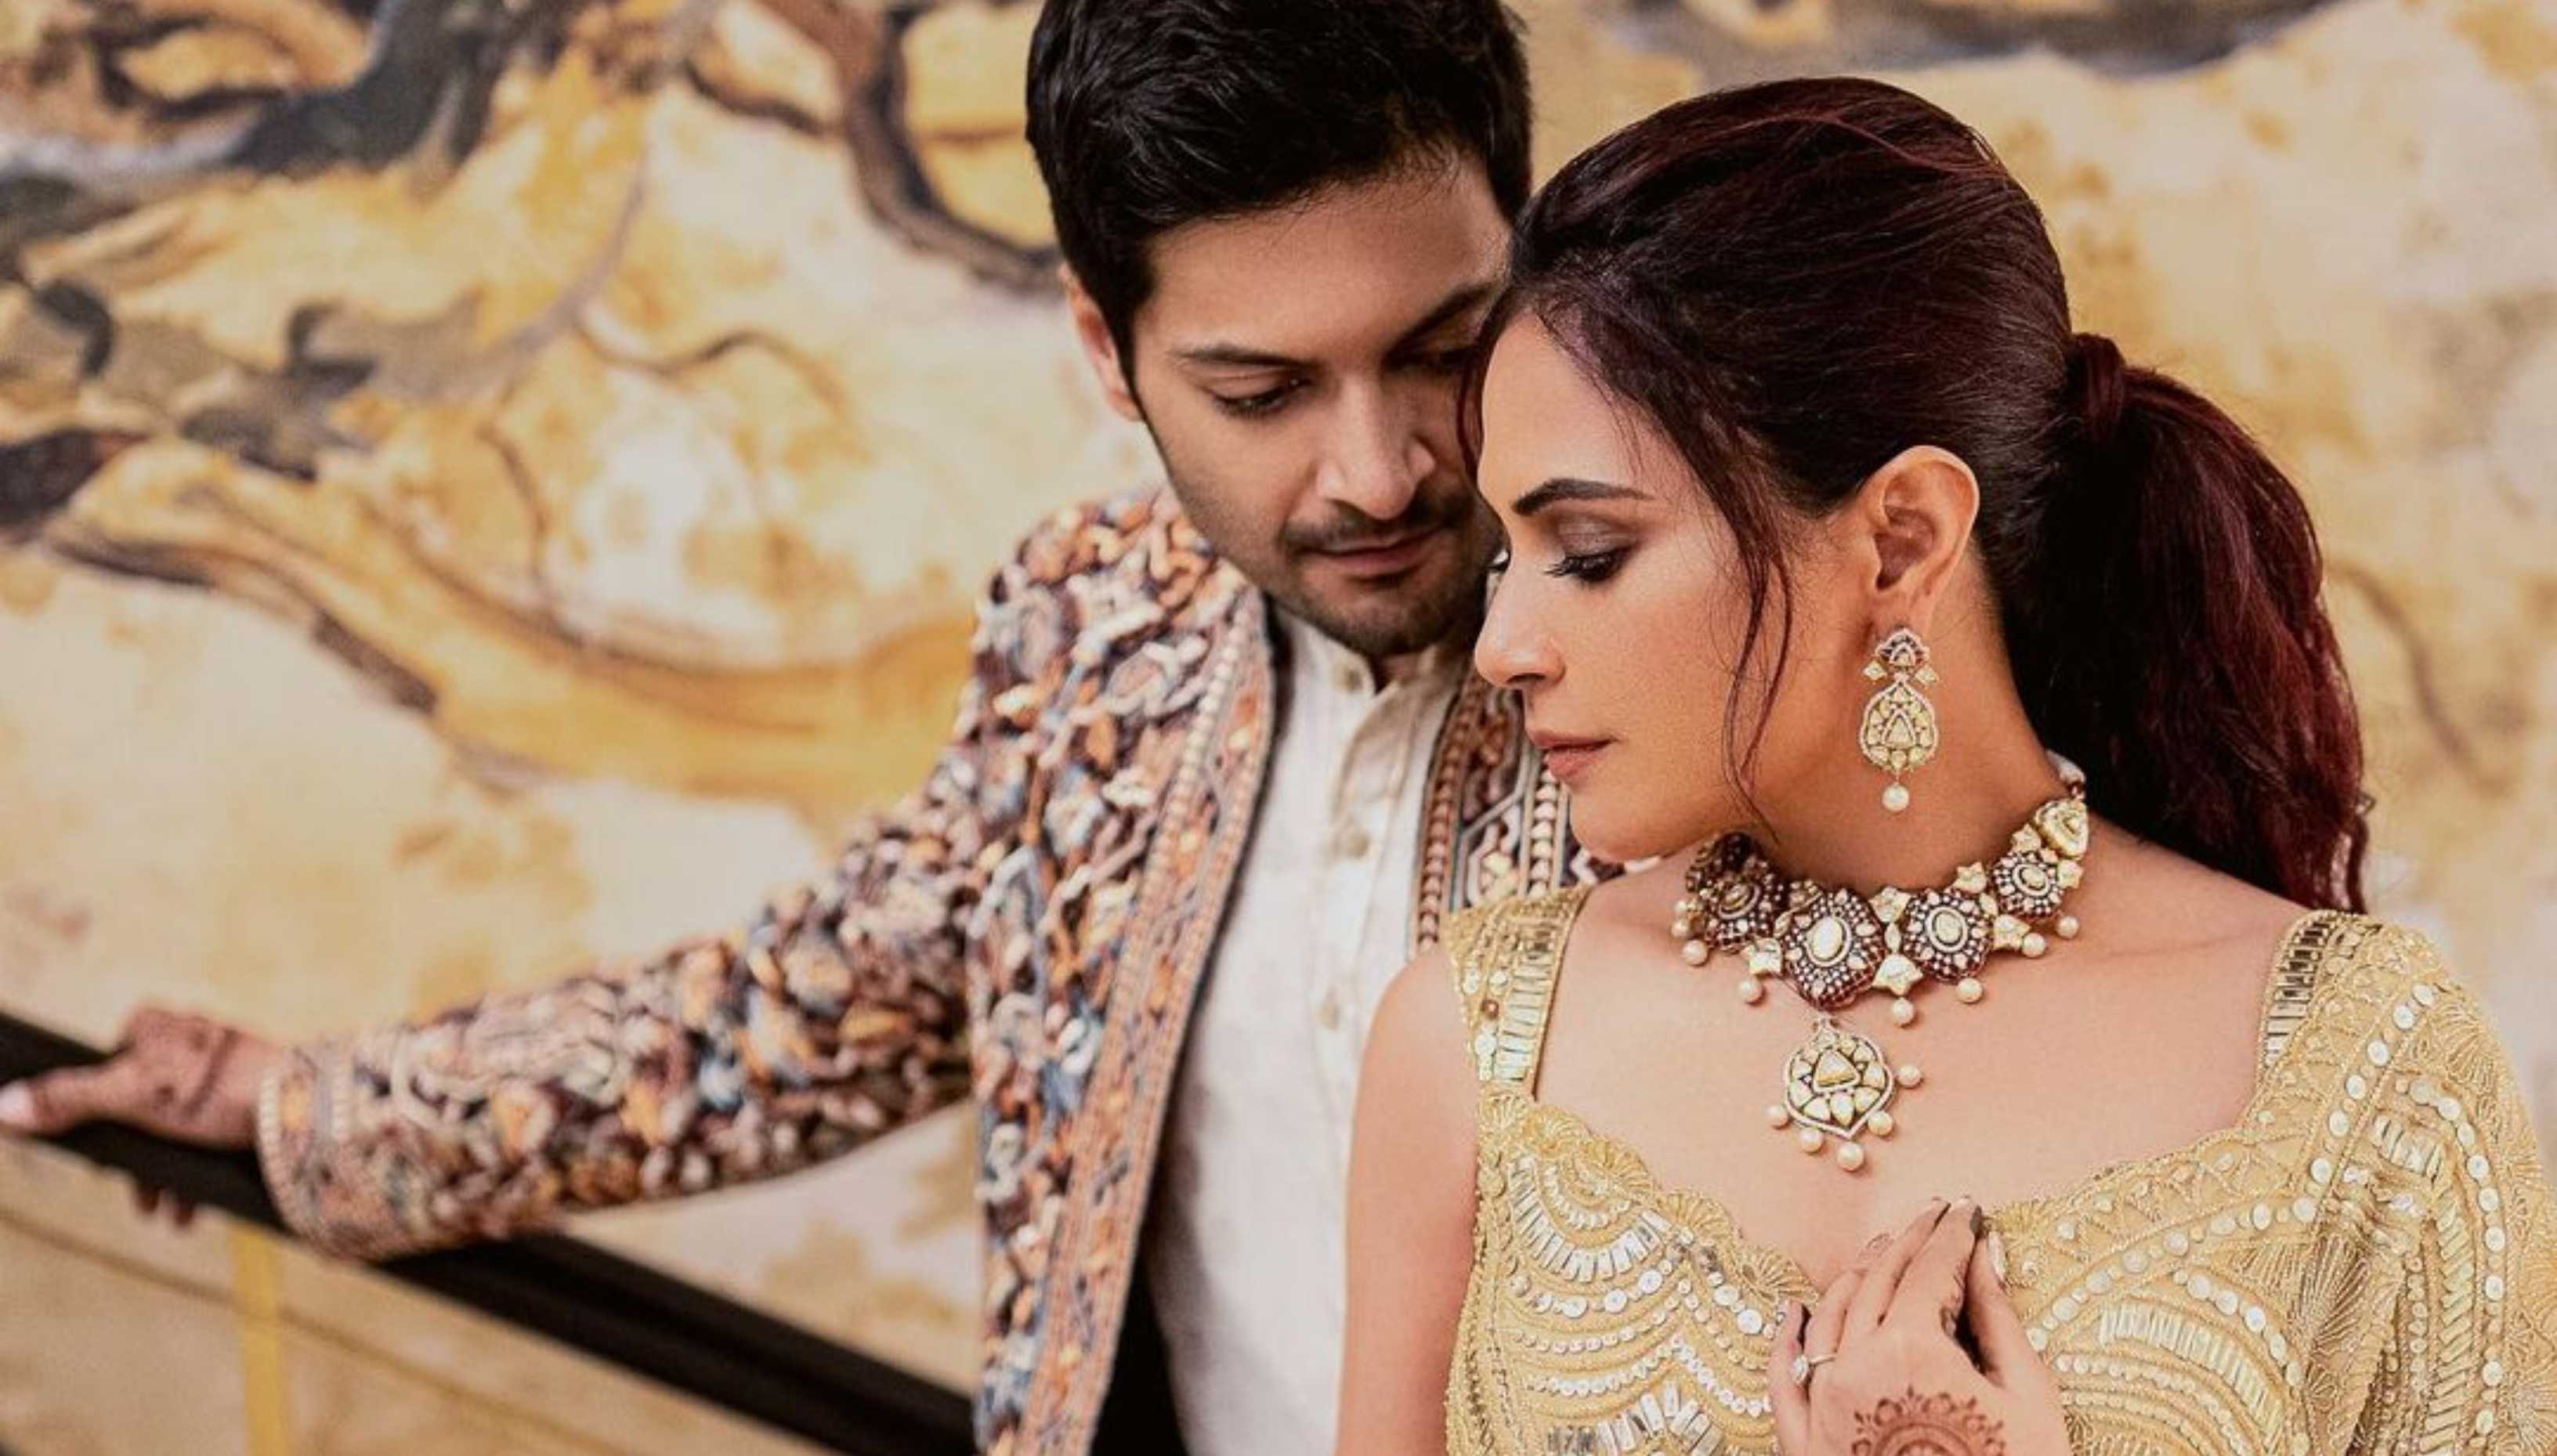 Richa Chadha & Ali Fazal enjoyed qawwali in Lucknow ahead of their wedding; here’s what they have planned for tonight